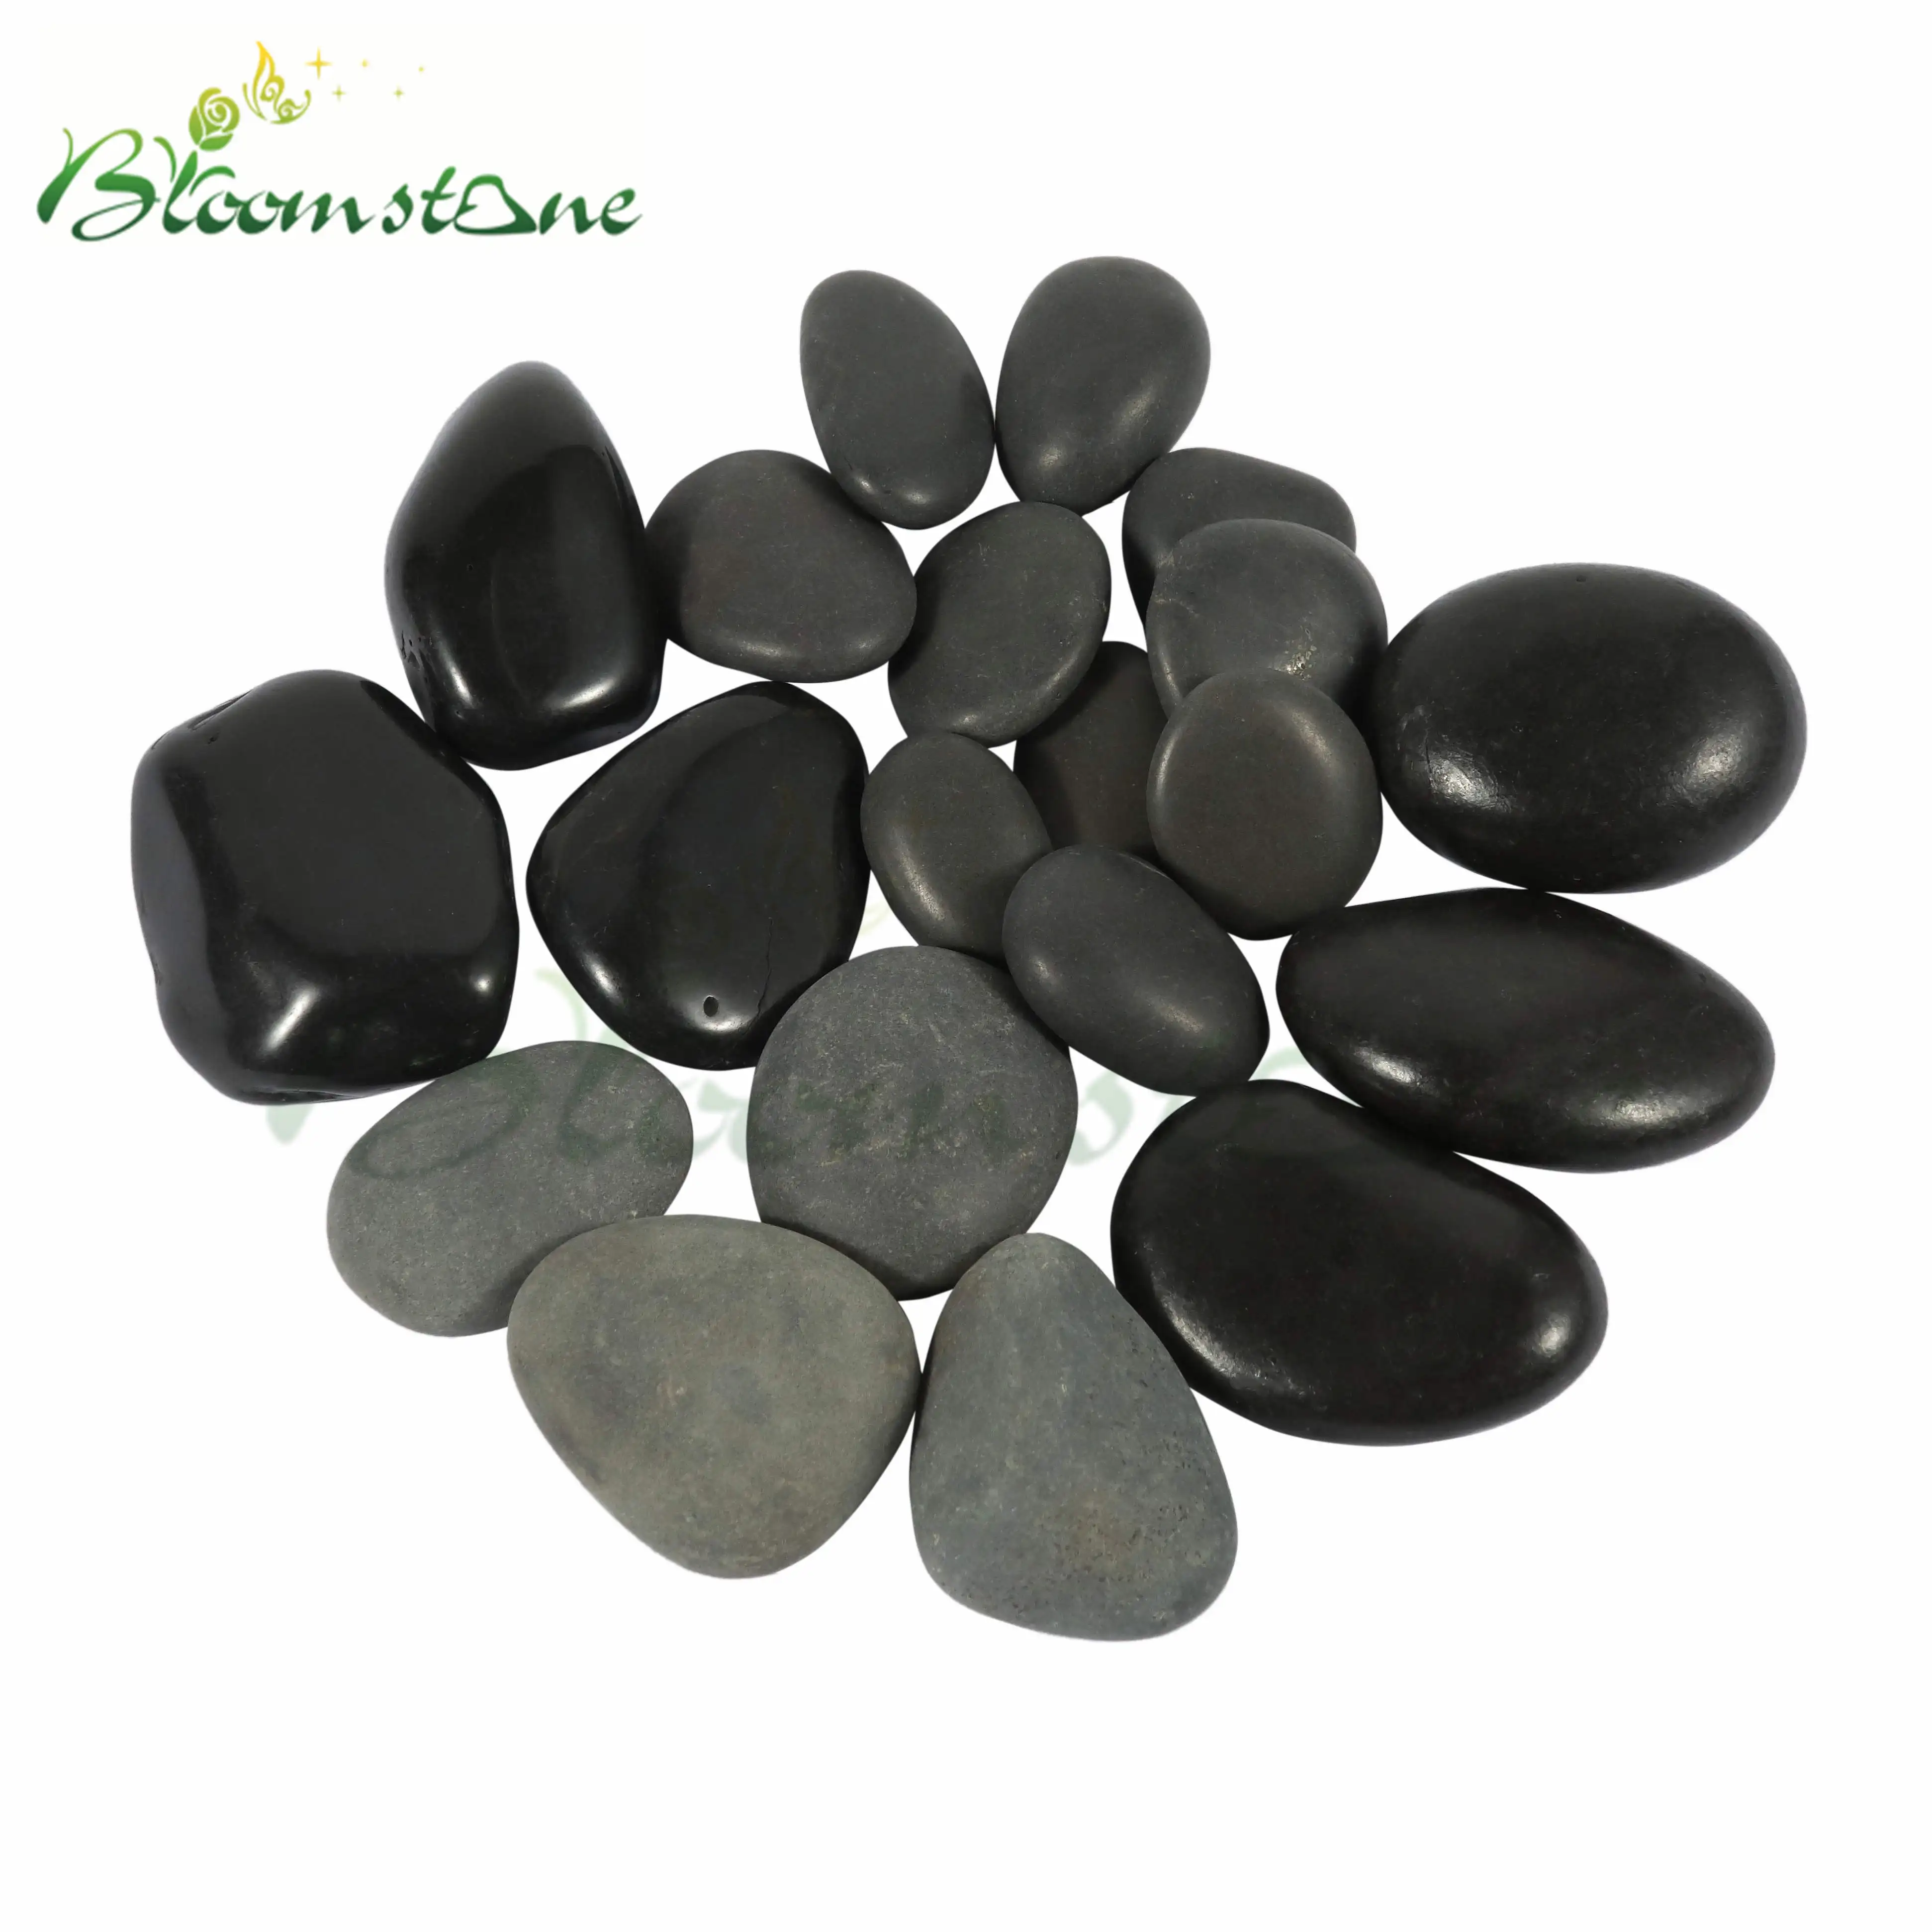 Black Collection Marbles Polished River Stone Pebble Home Garden Memorial Craft 